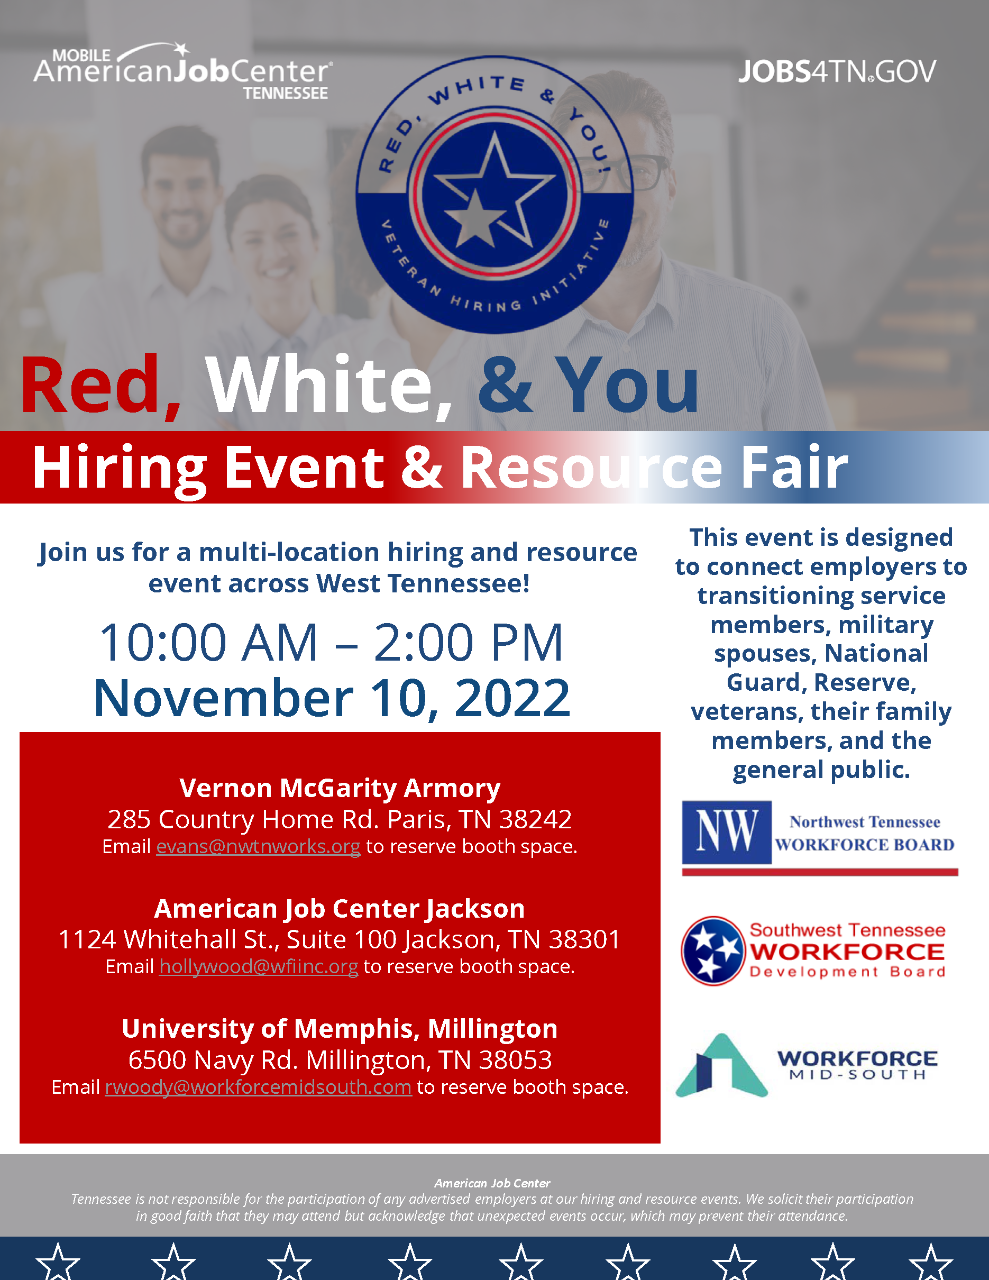 Red, White, & You Hiring Event and Resource Fair for Veterans and the